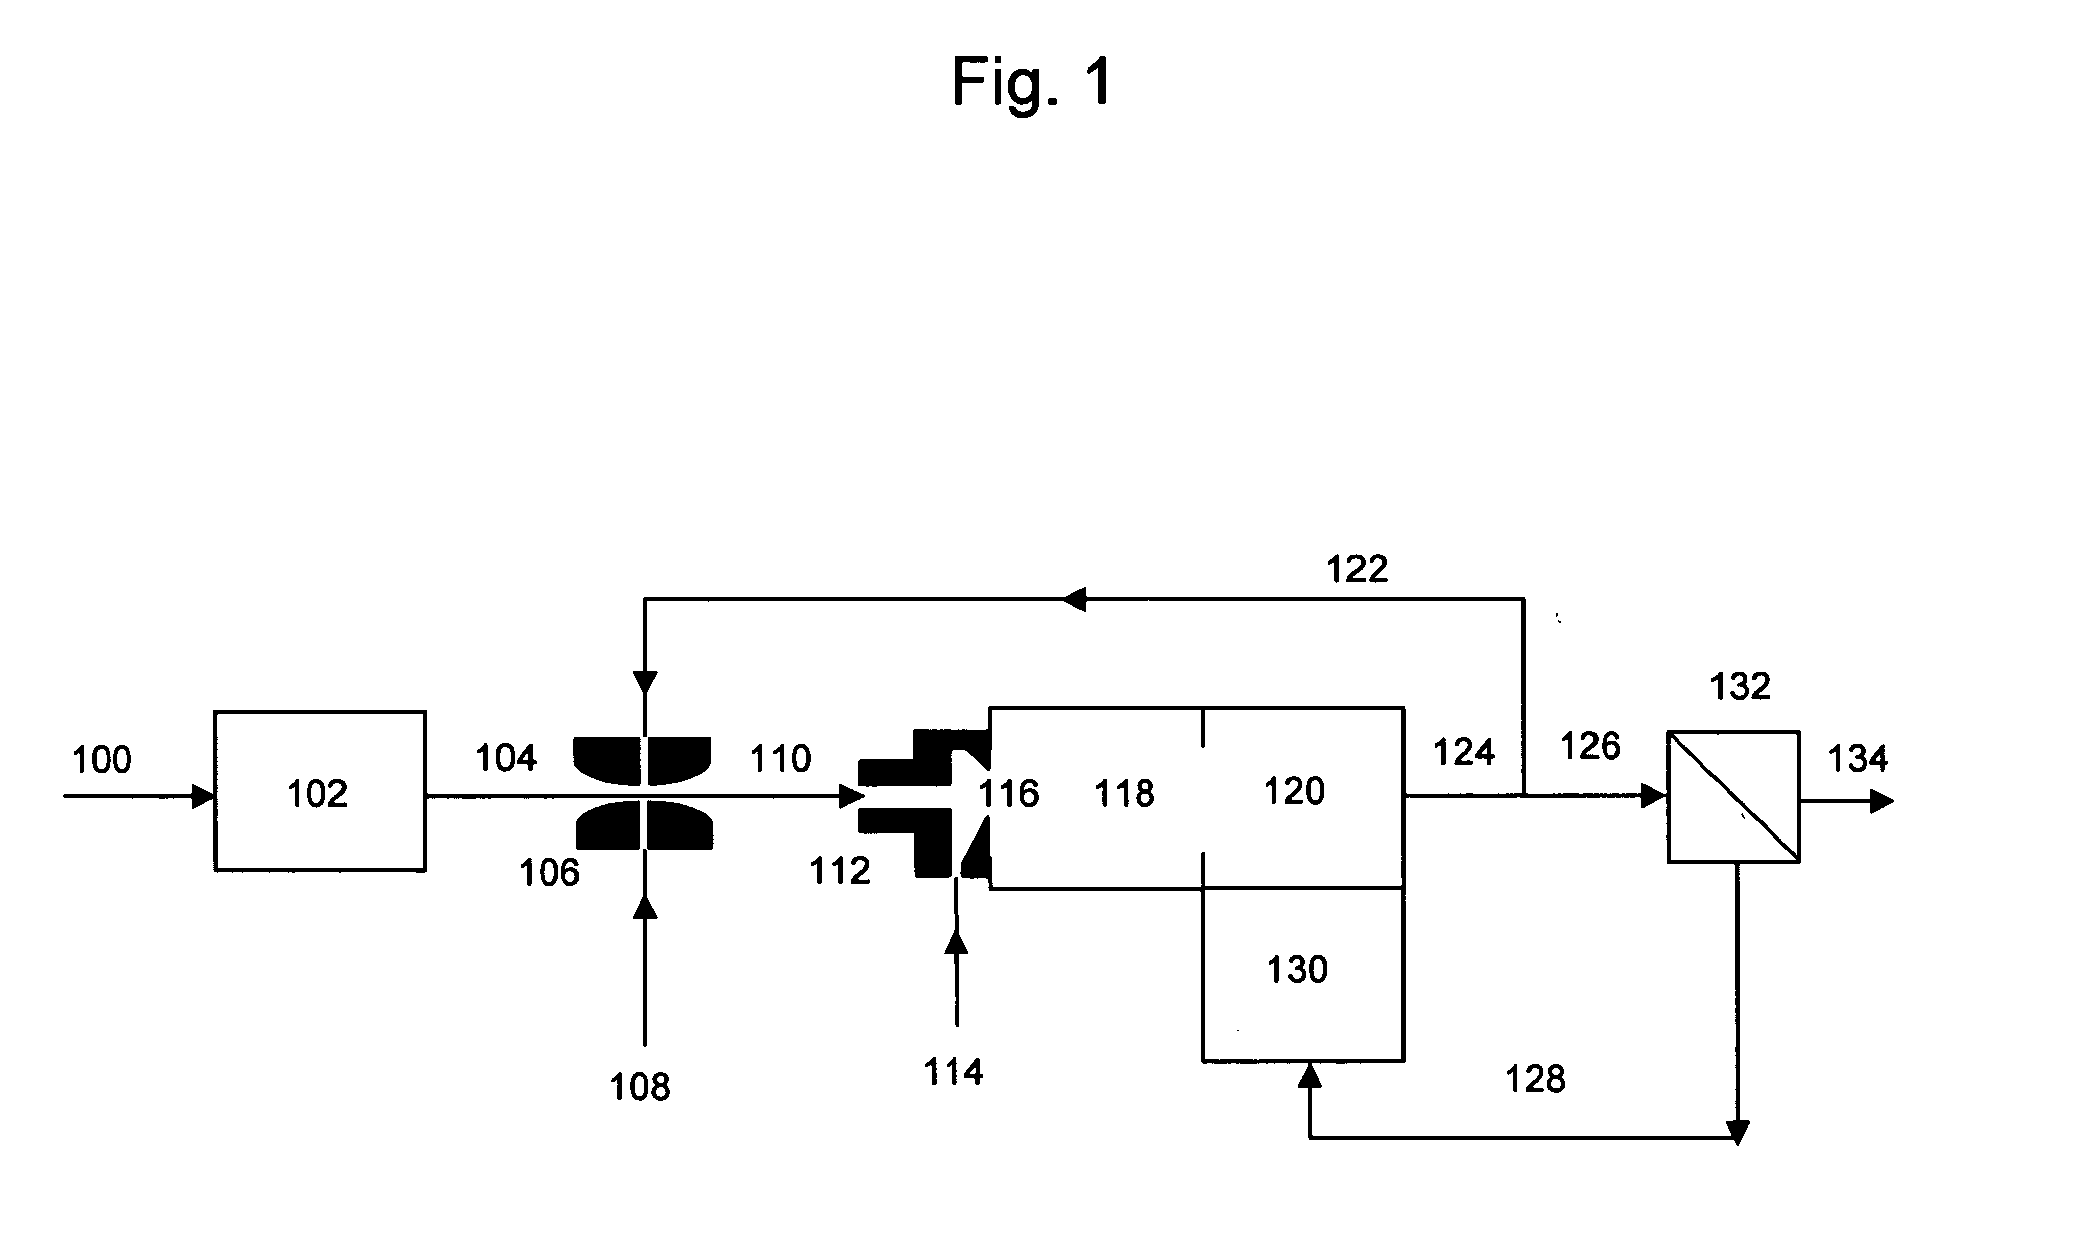 Systems and methods for generating hydrogen from hycrocarbon fuels